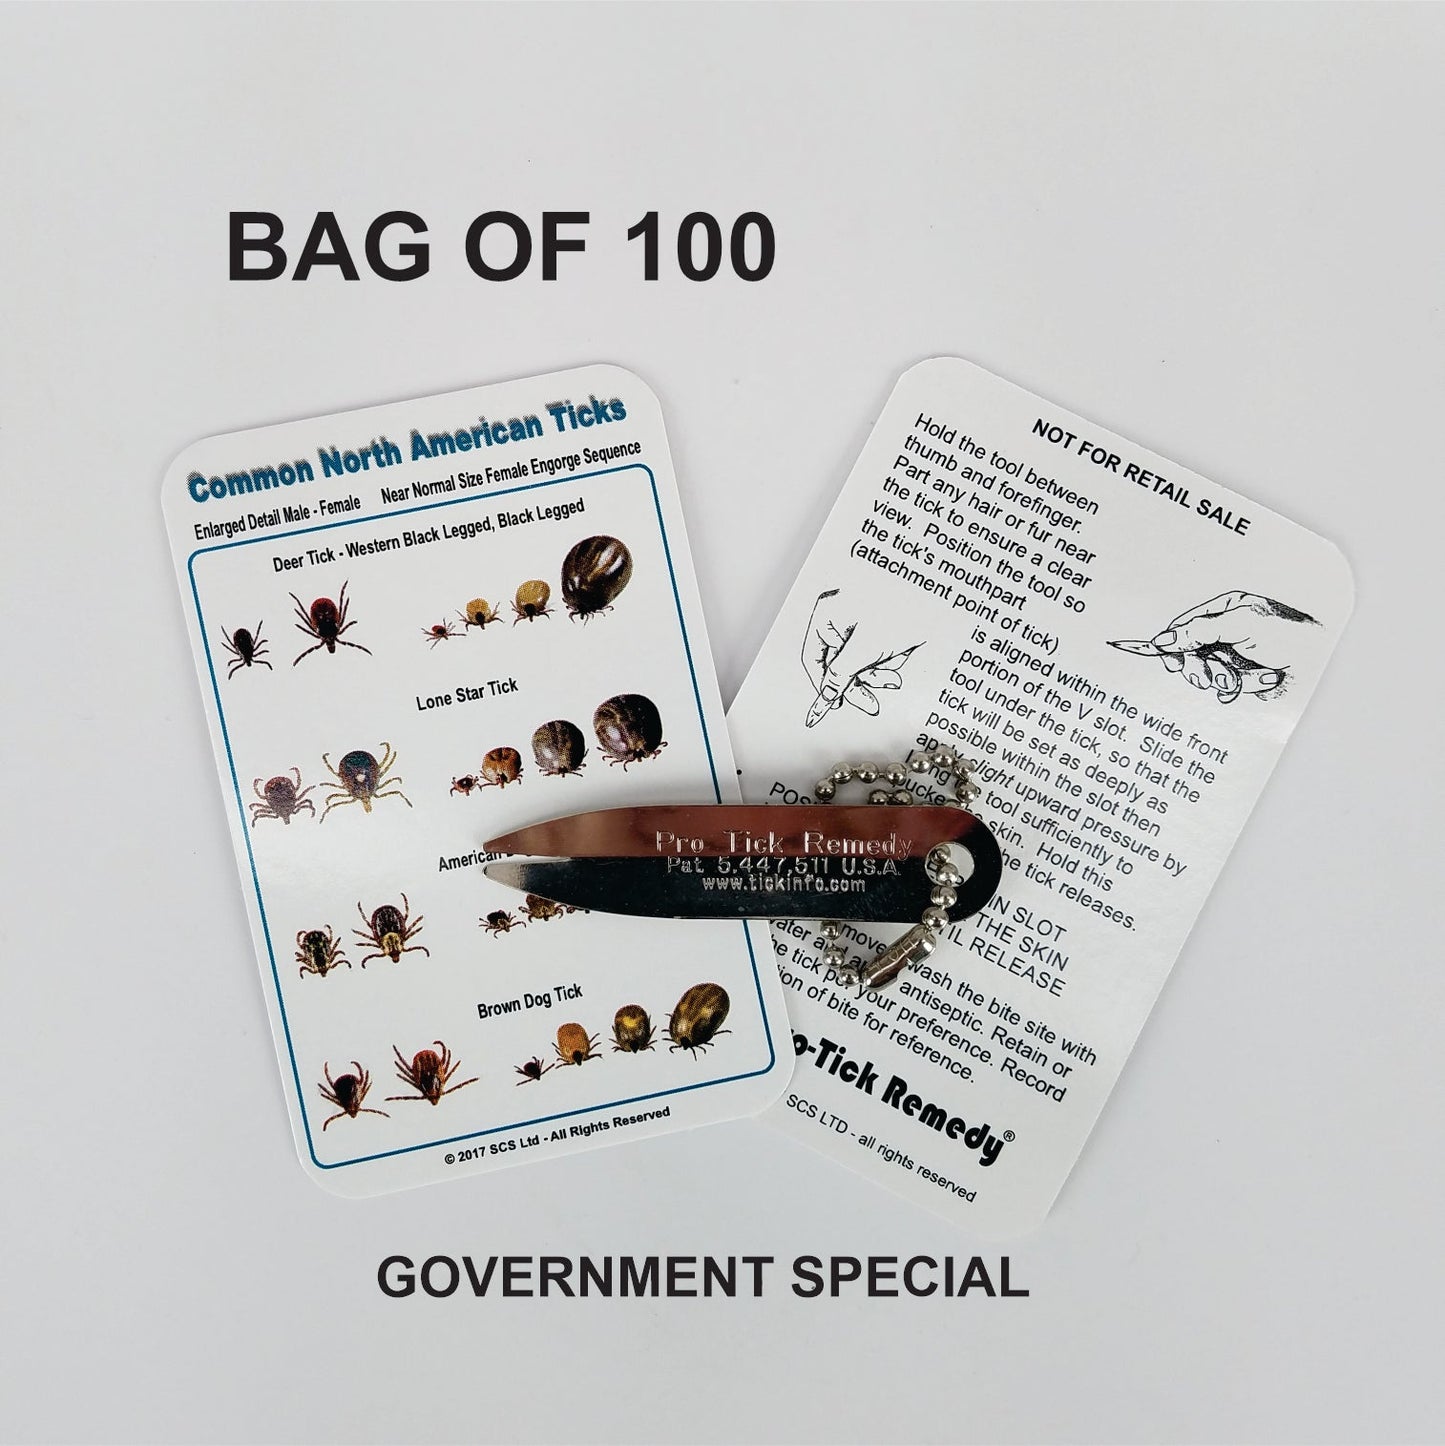 NON USA ProTick Remedy (BAG 100) + Tick ID Card for Government and Community Outreach Programs